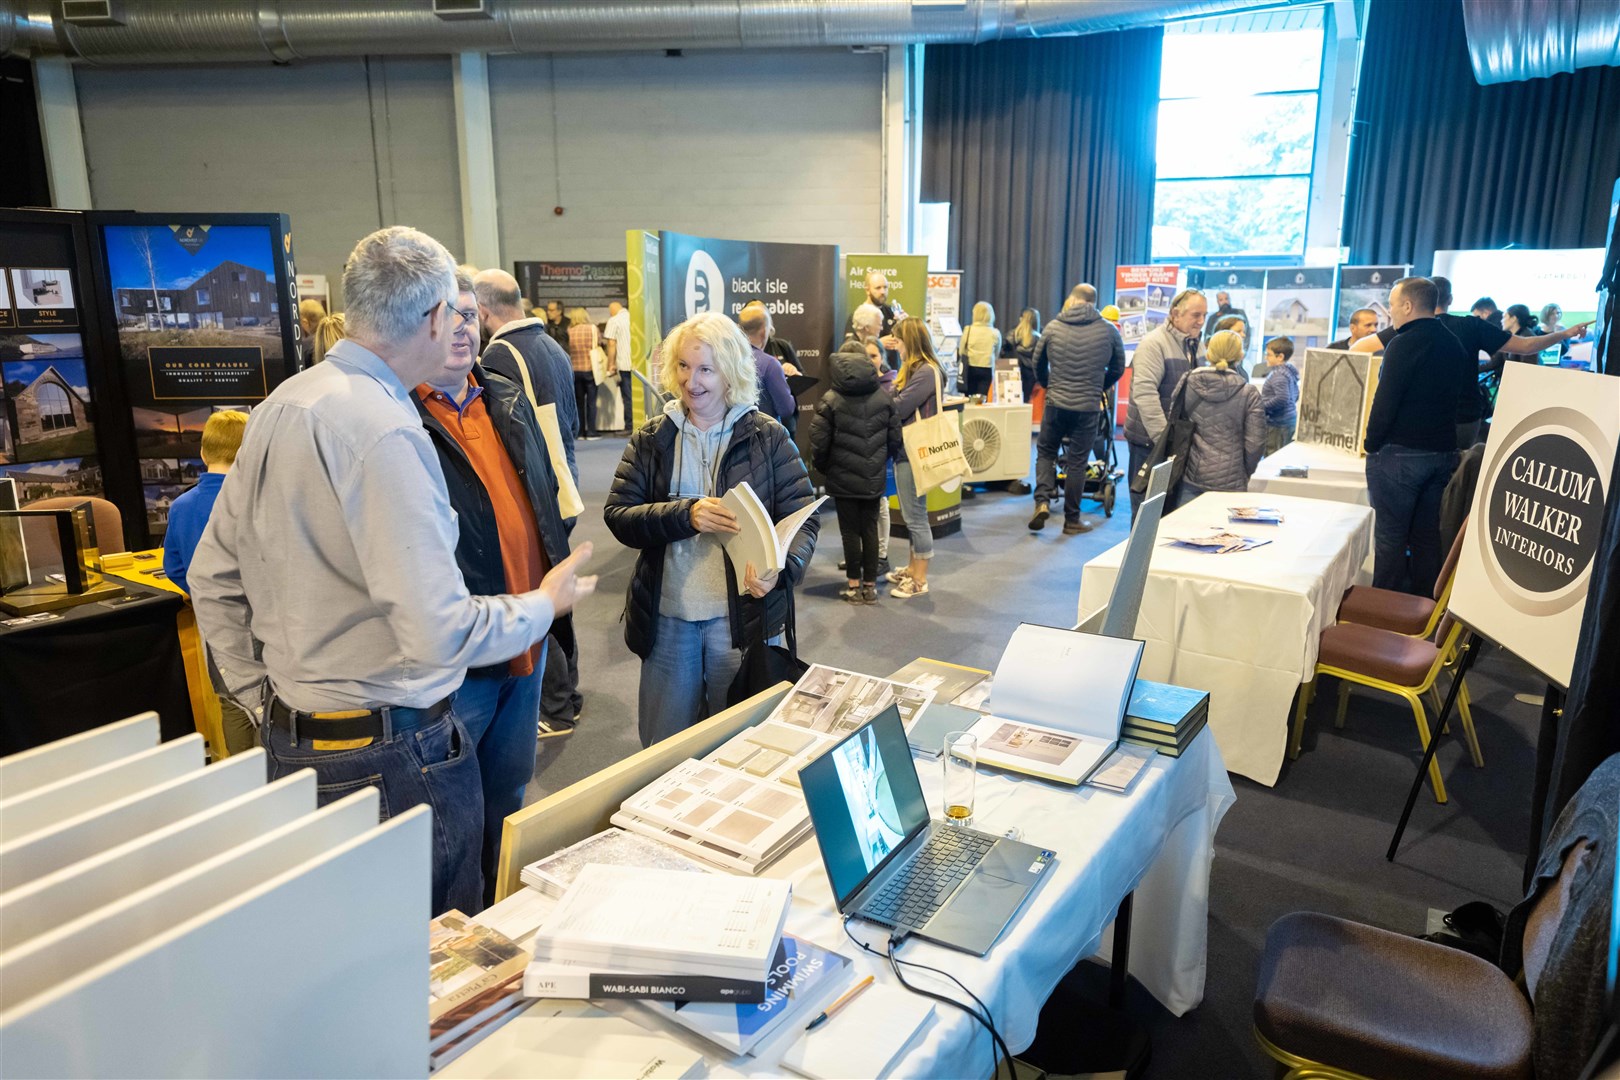 There will be over 60 exhibitors at this year's Self-Build conference. Picture: Michal Wachucik/Abermedia